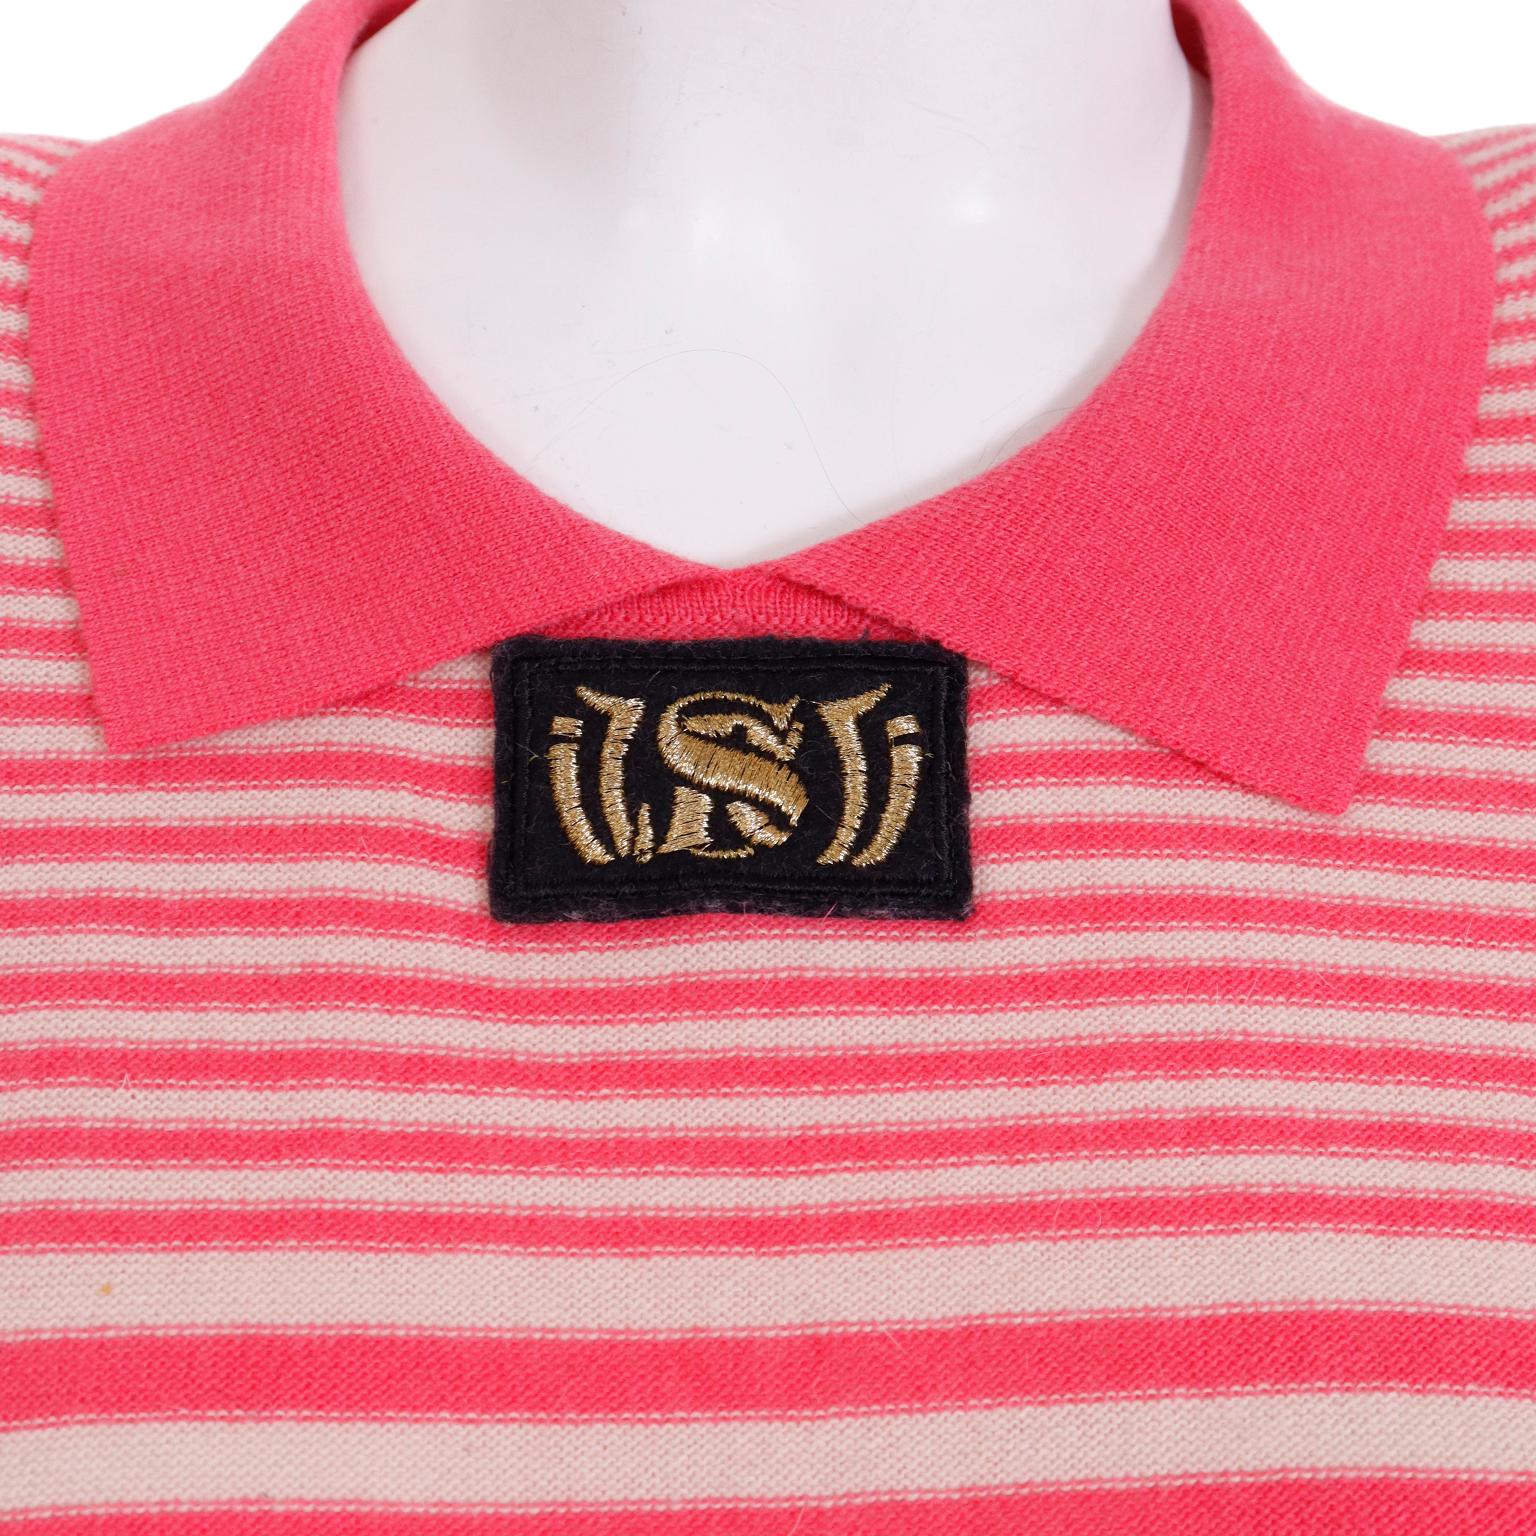 Sonia Rykiel Vintage Pink Striped 1980s Knit Sweater Top w Logo Emblem In Excellent Condition For Sale In Portland, OR